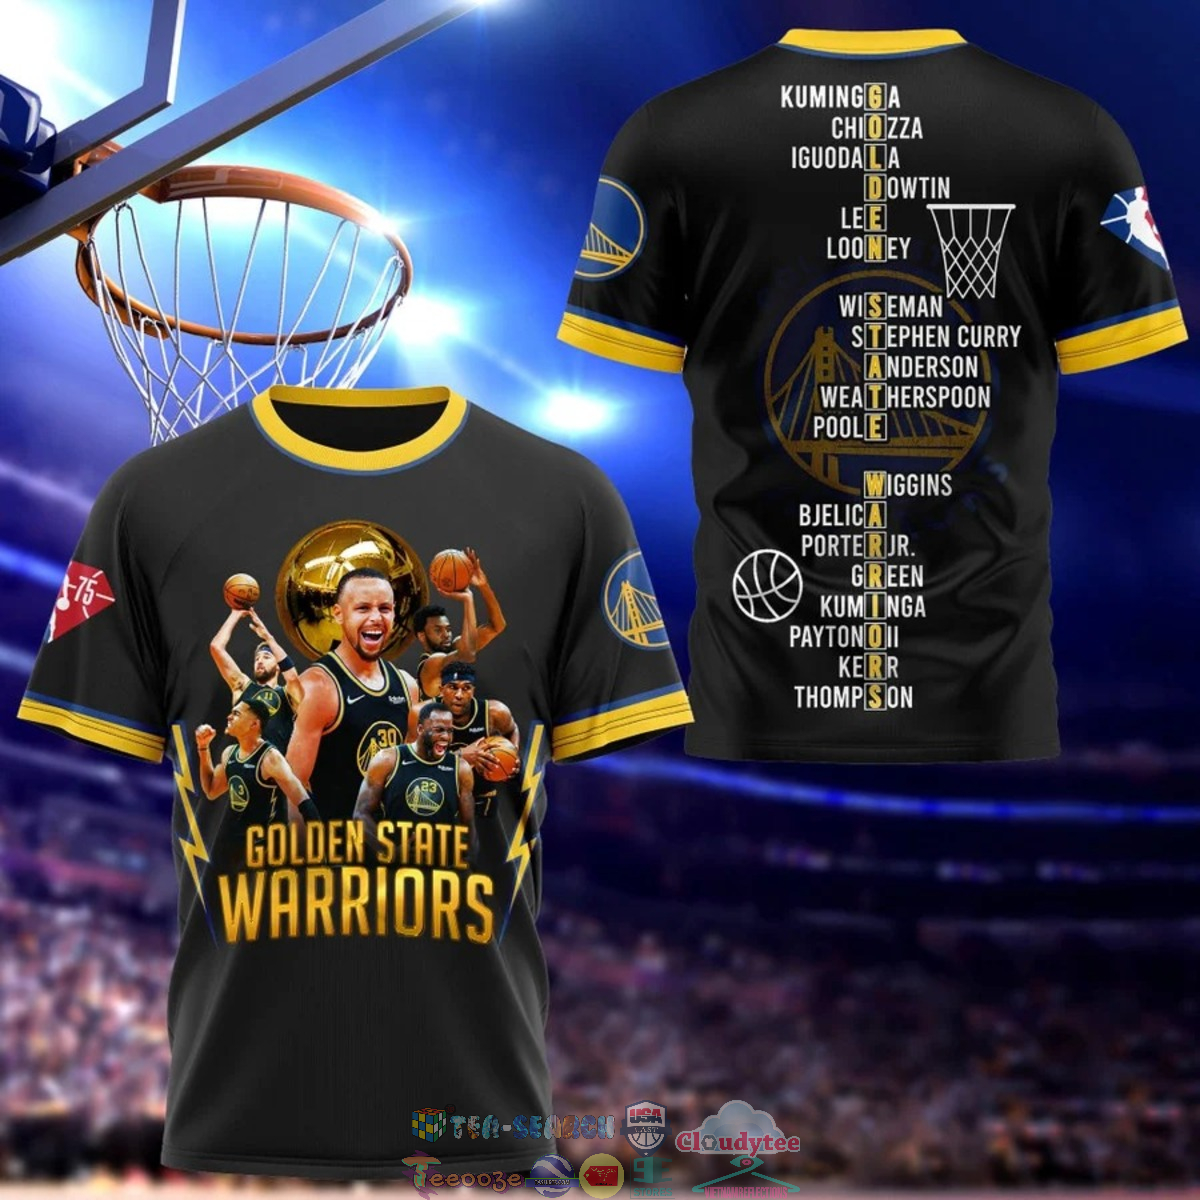 mJmD1i3y-TH030822-13xxxGolden-State-Warriors-Yellow-Gold-3D-Shirt3.jpg